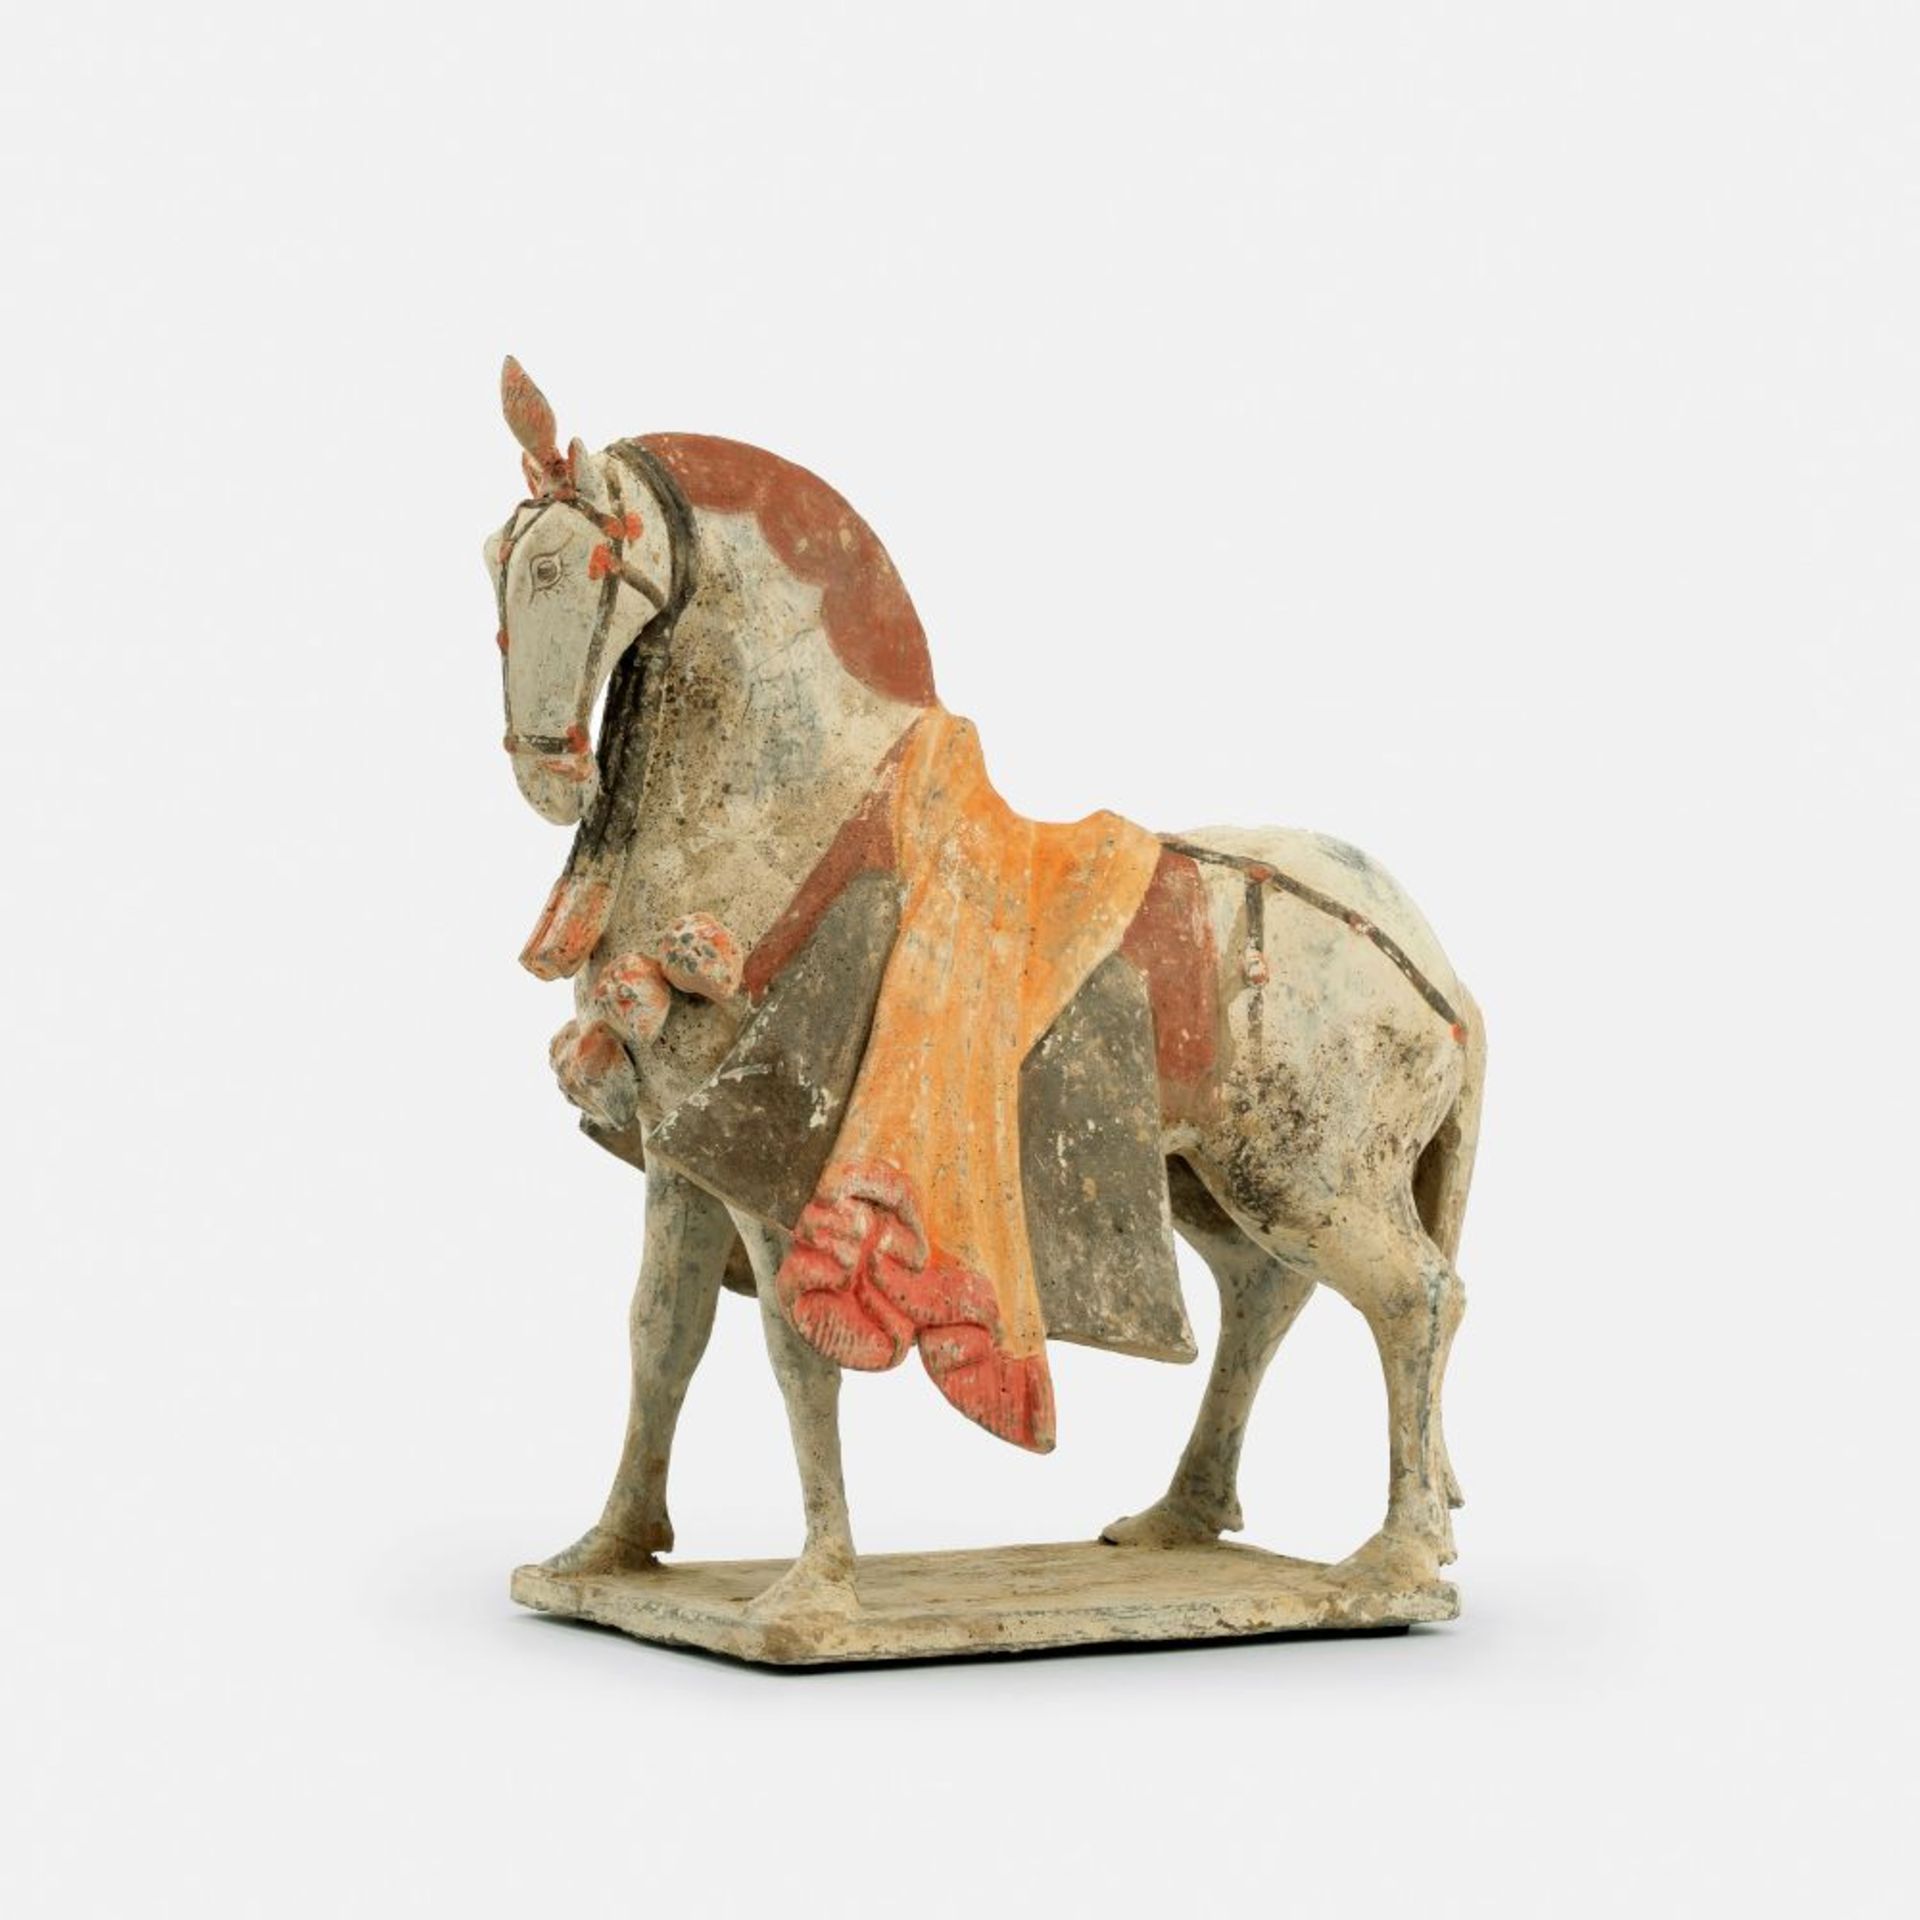 A Painted Pottery Figure of a Caparisoned Horse.